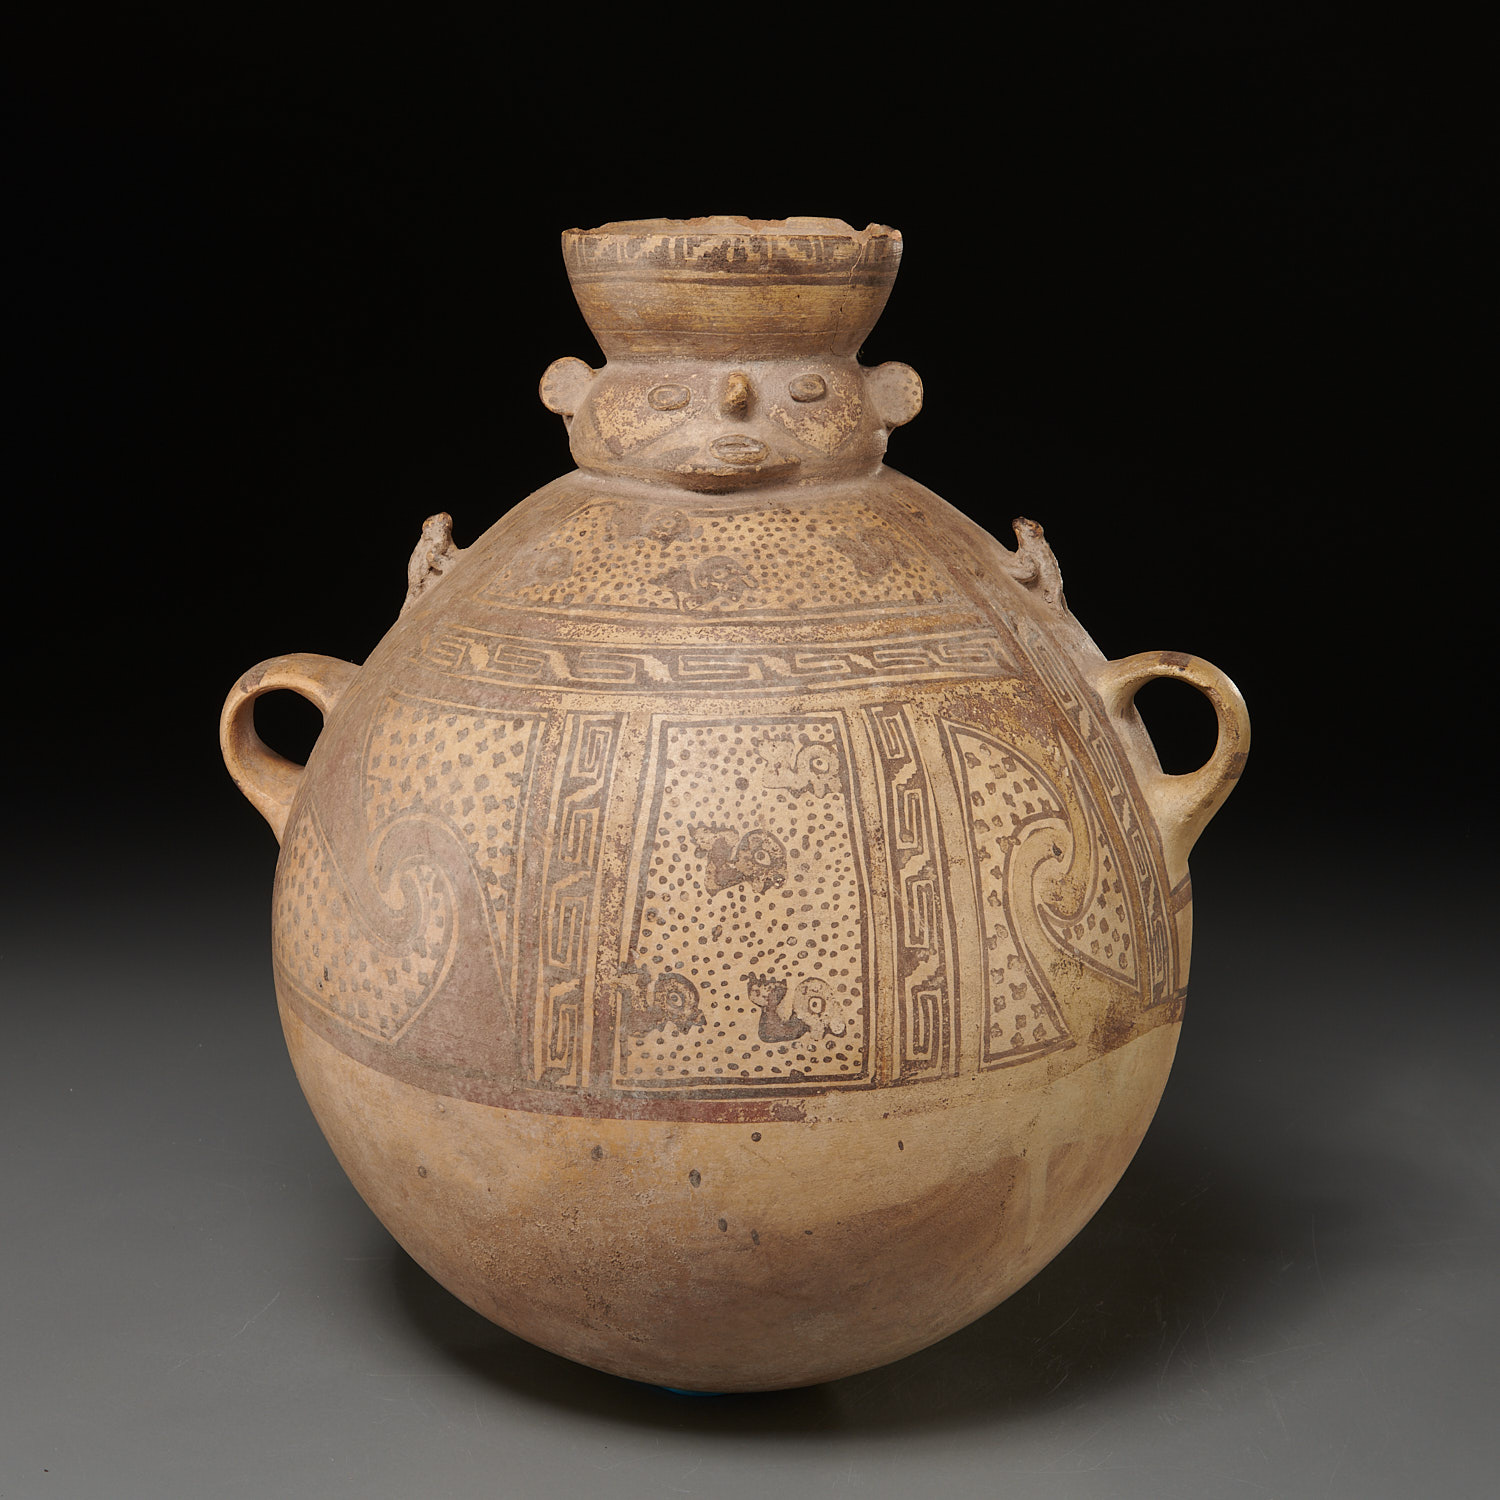 LARGE PRE-COLOMBIAN CERAMIC EFFIGY